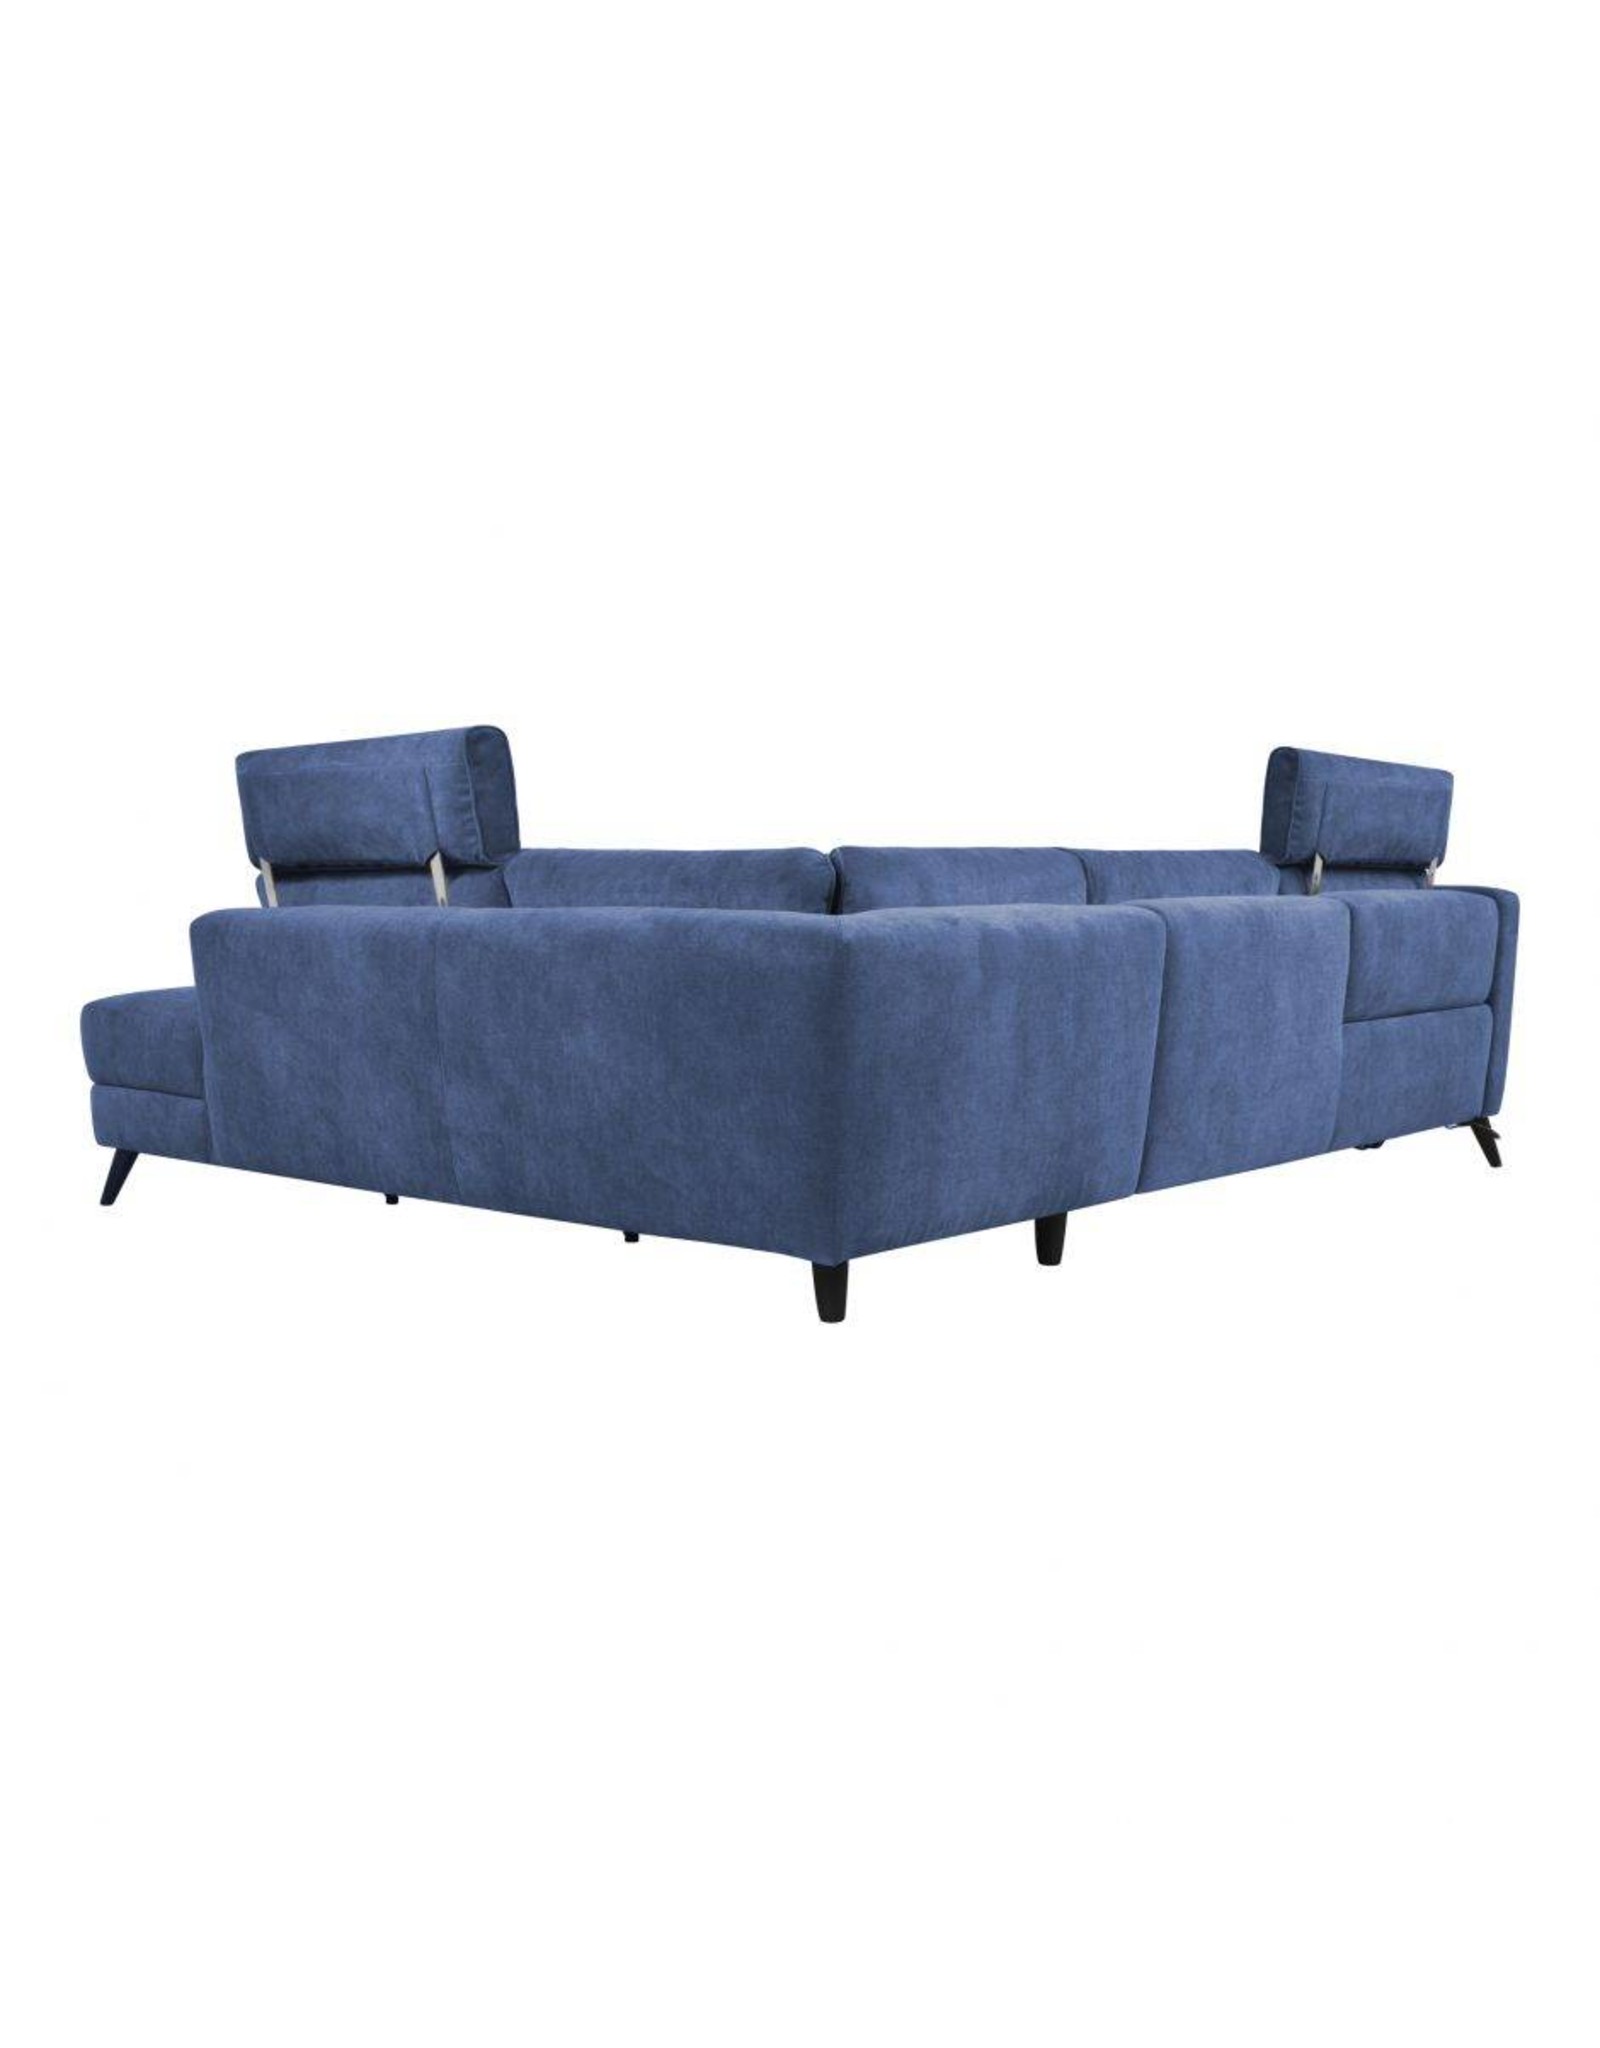 Monroe & Kent BEAUMONT POWER SECTIONAL RIGHT NAVY